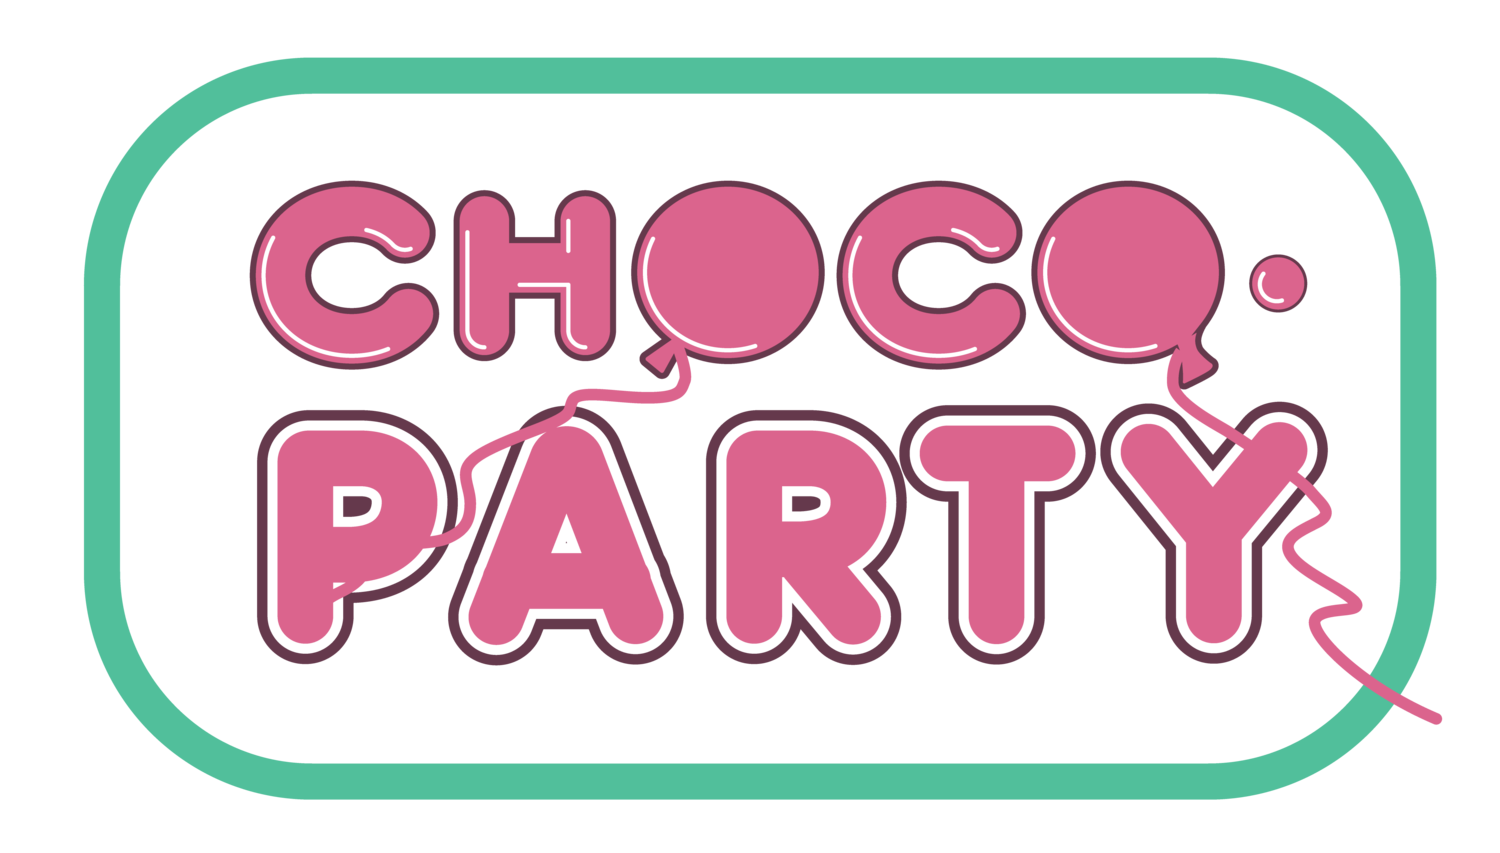 Choco Party